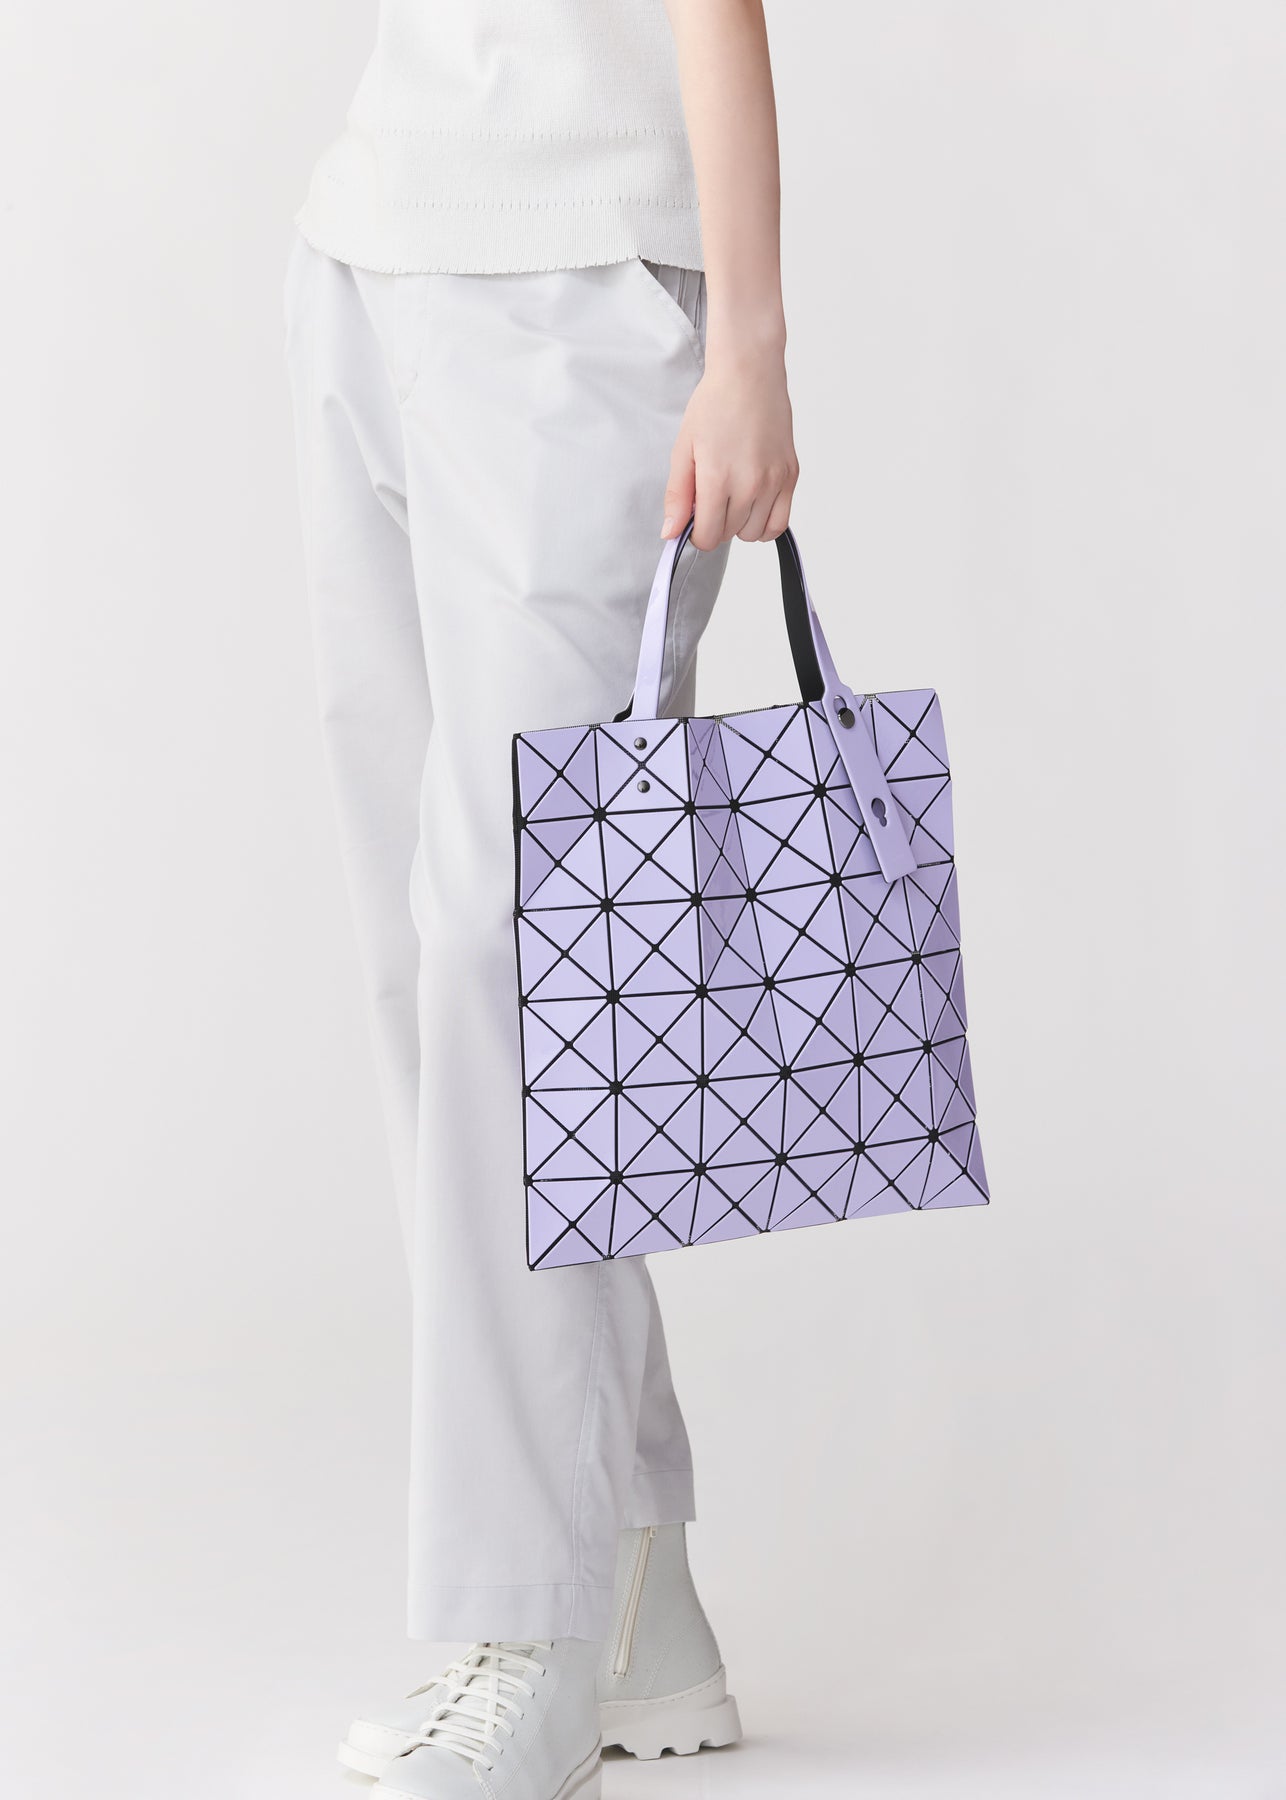 LUCENT GLOSS TOTE BAG, The official ISSEY MIYAKE ONLINE STORE